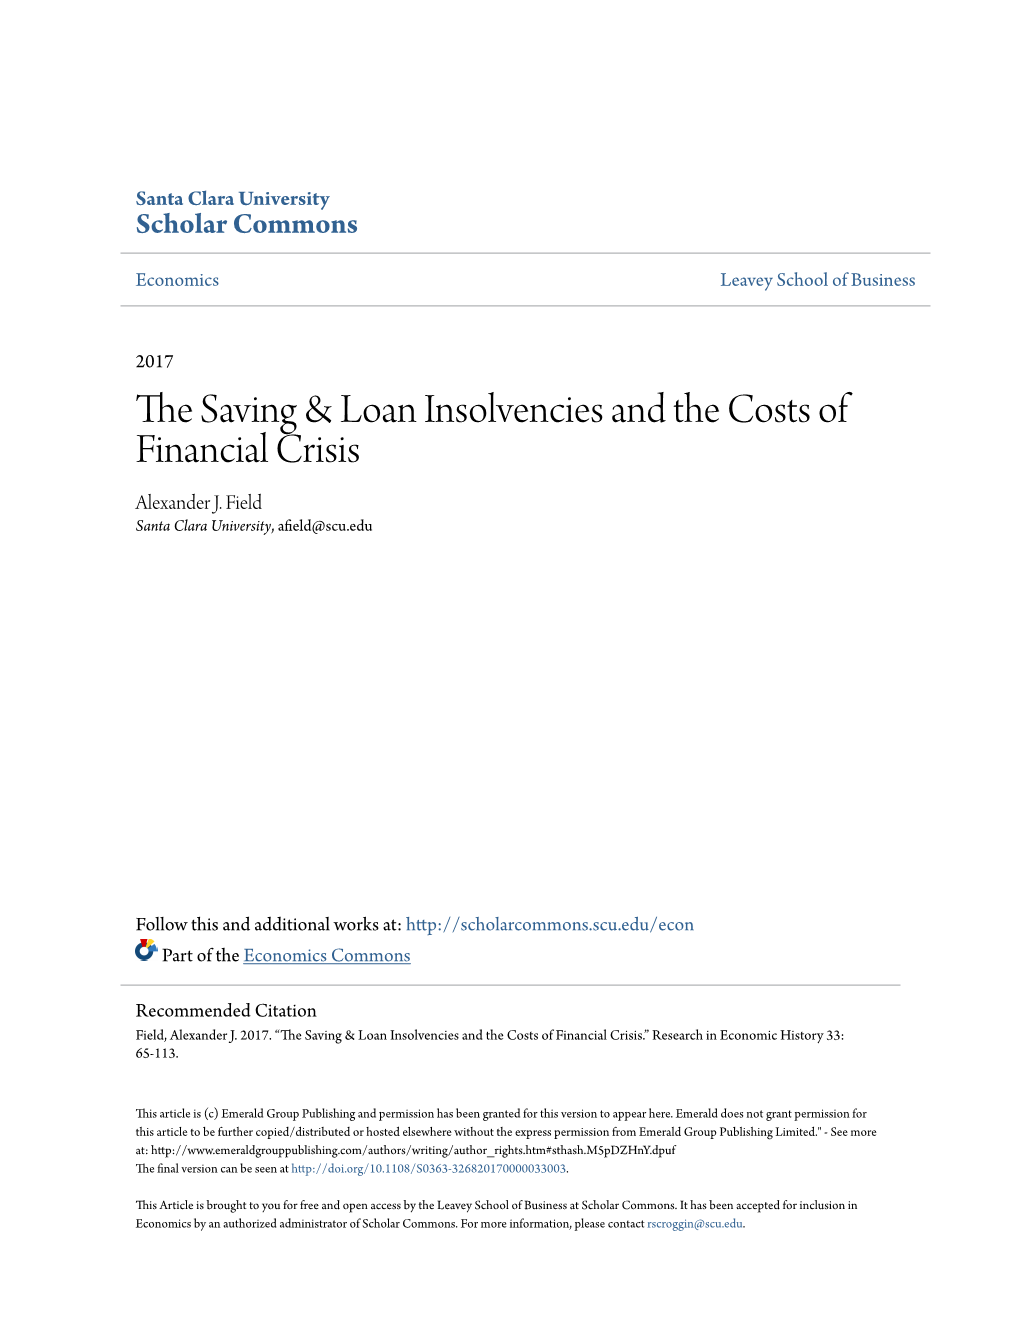 The Saving & Loan Insolvencies and the Costs of Financial Crisis